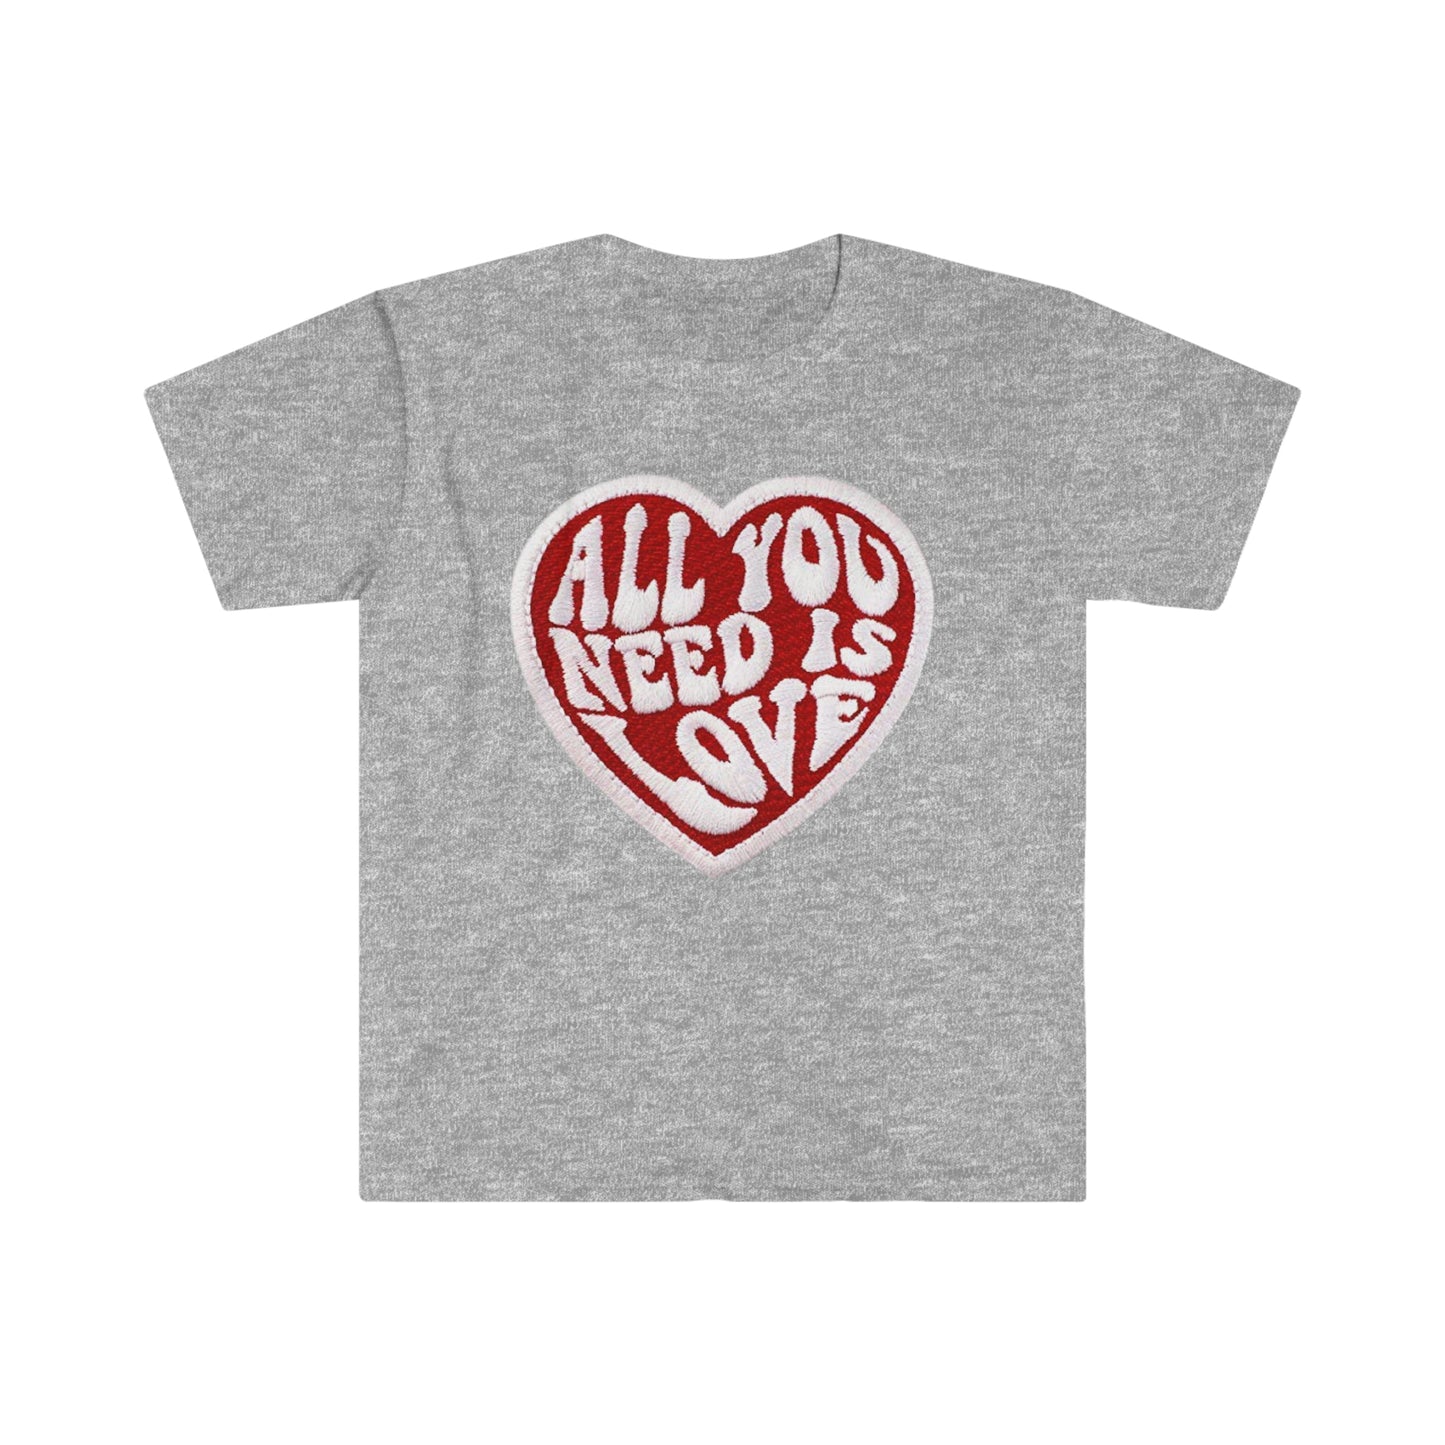 All you need is love Patch - Unisex Softstyle T-Shirt